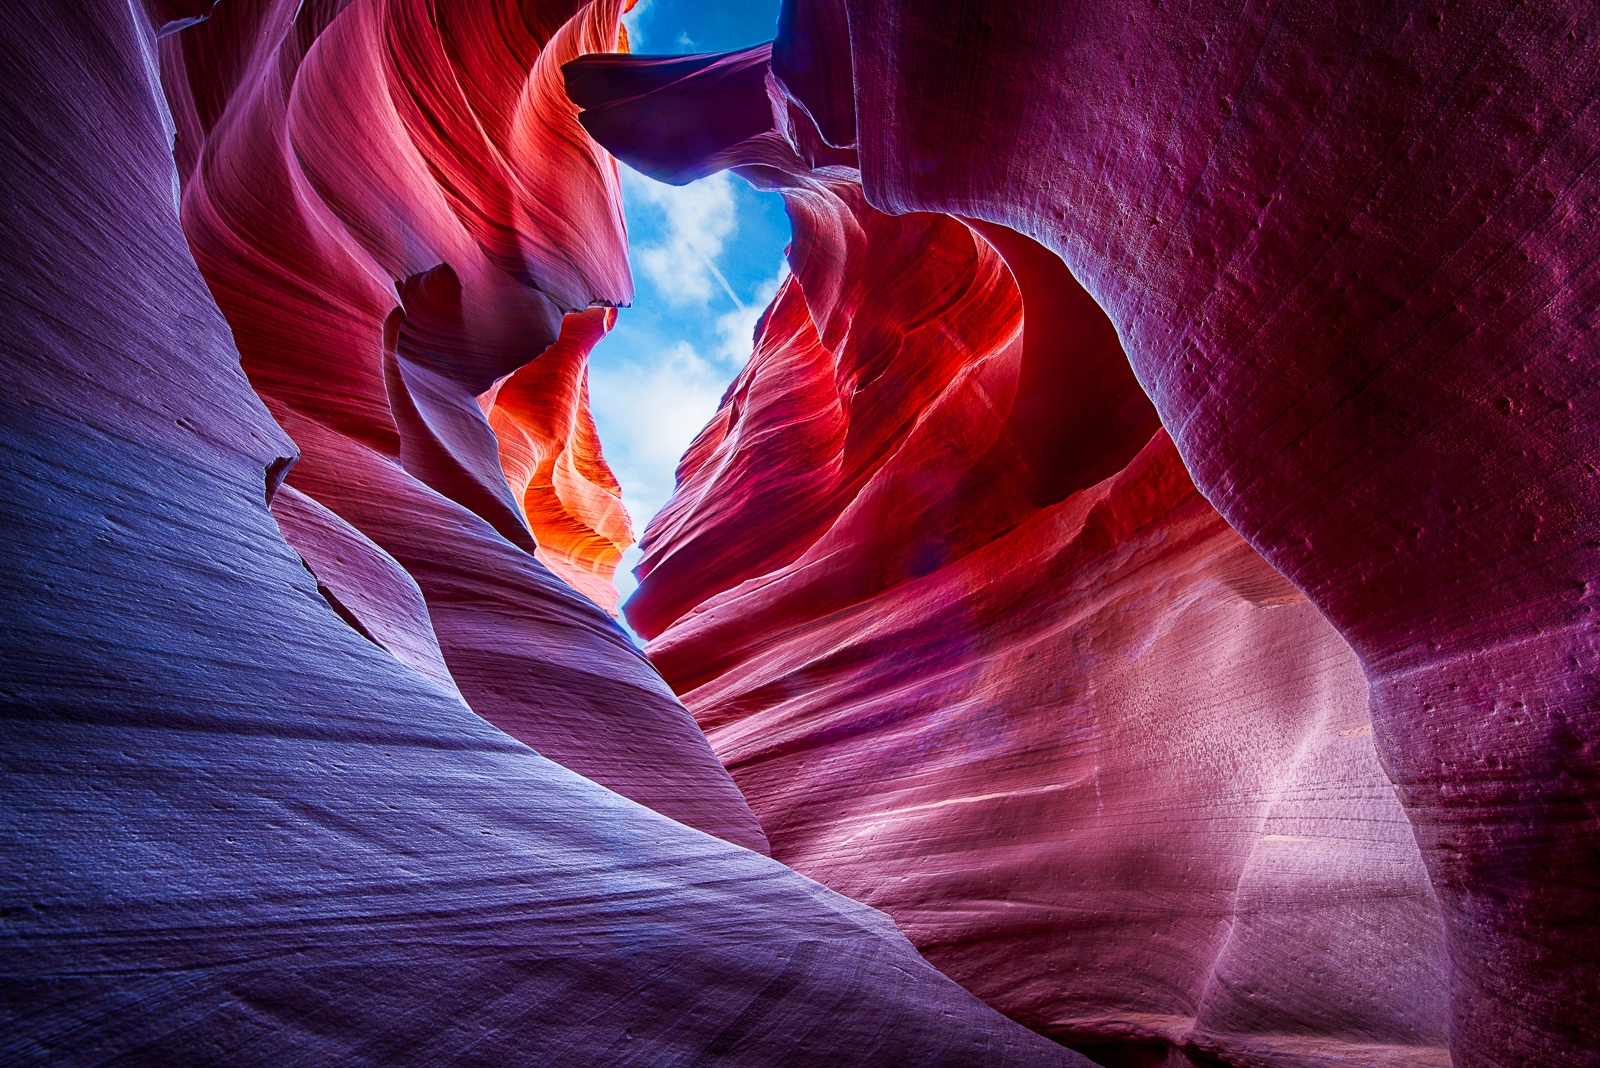 Antelope Canyon, The Most Beautiful Canyons in The World - Traveldigg.com